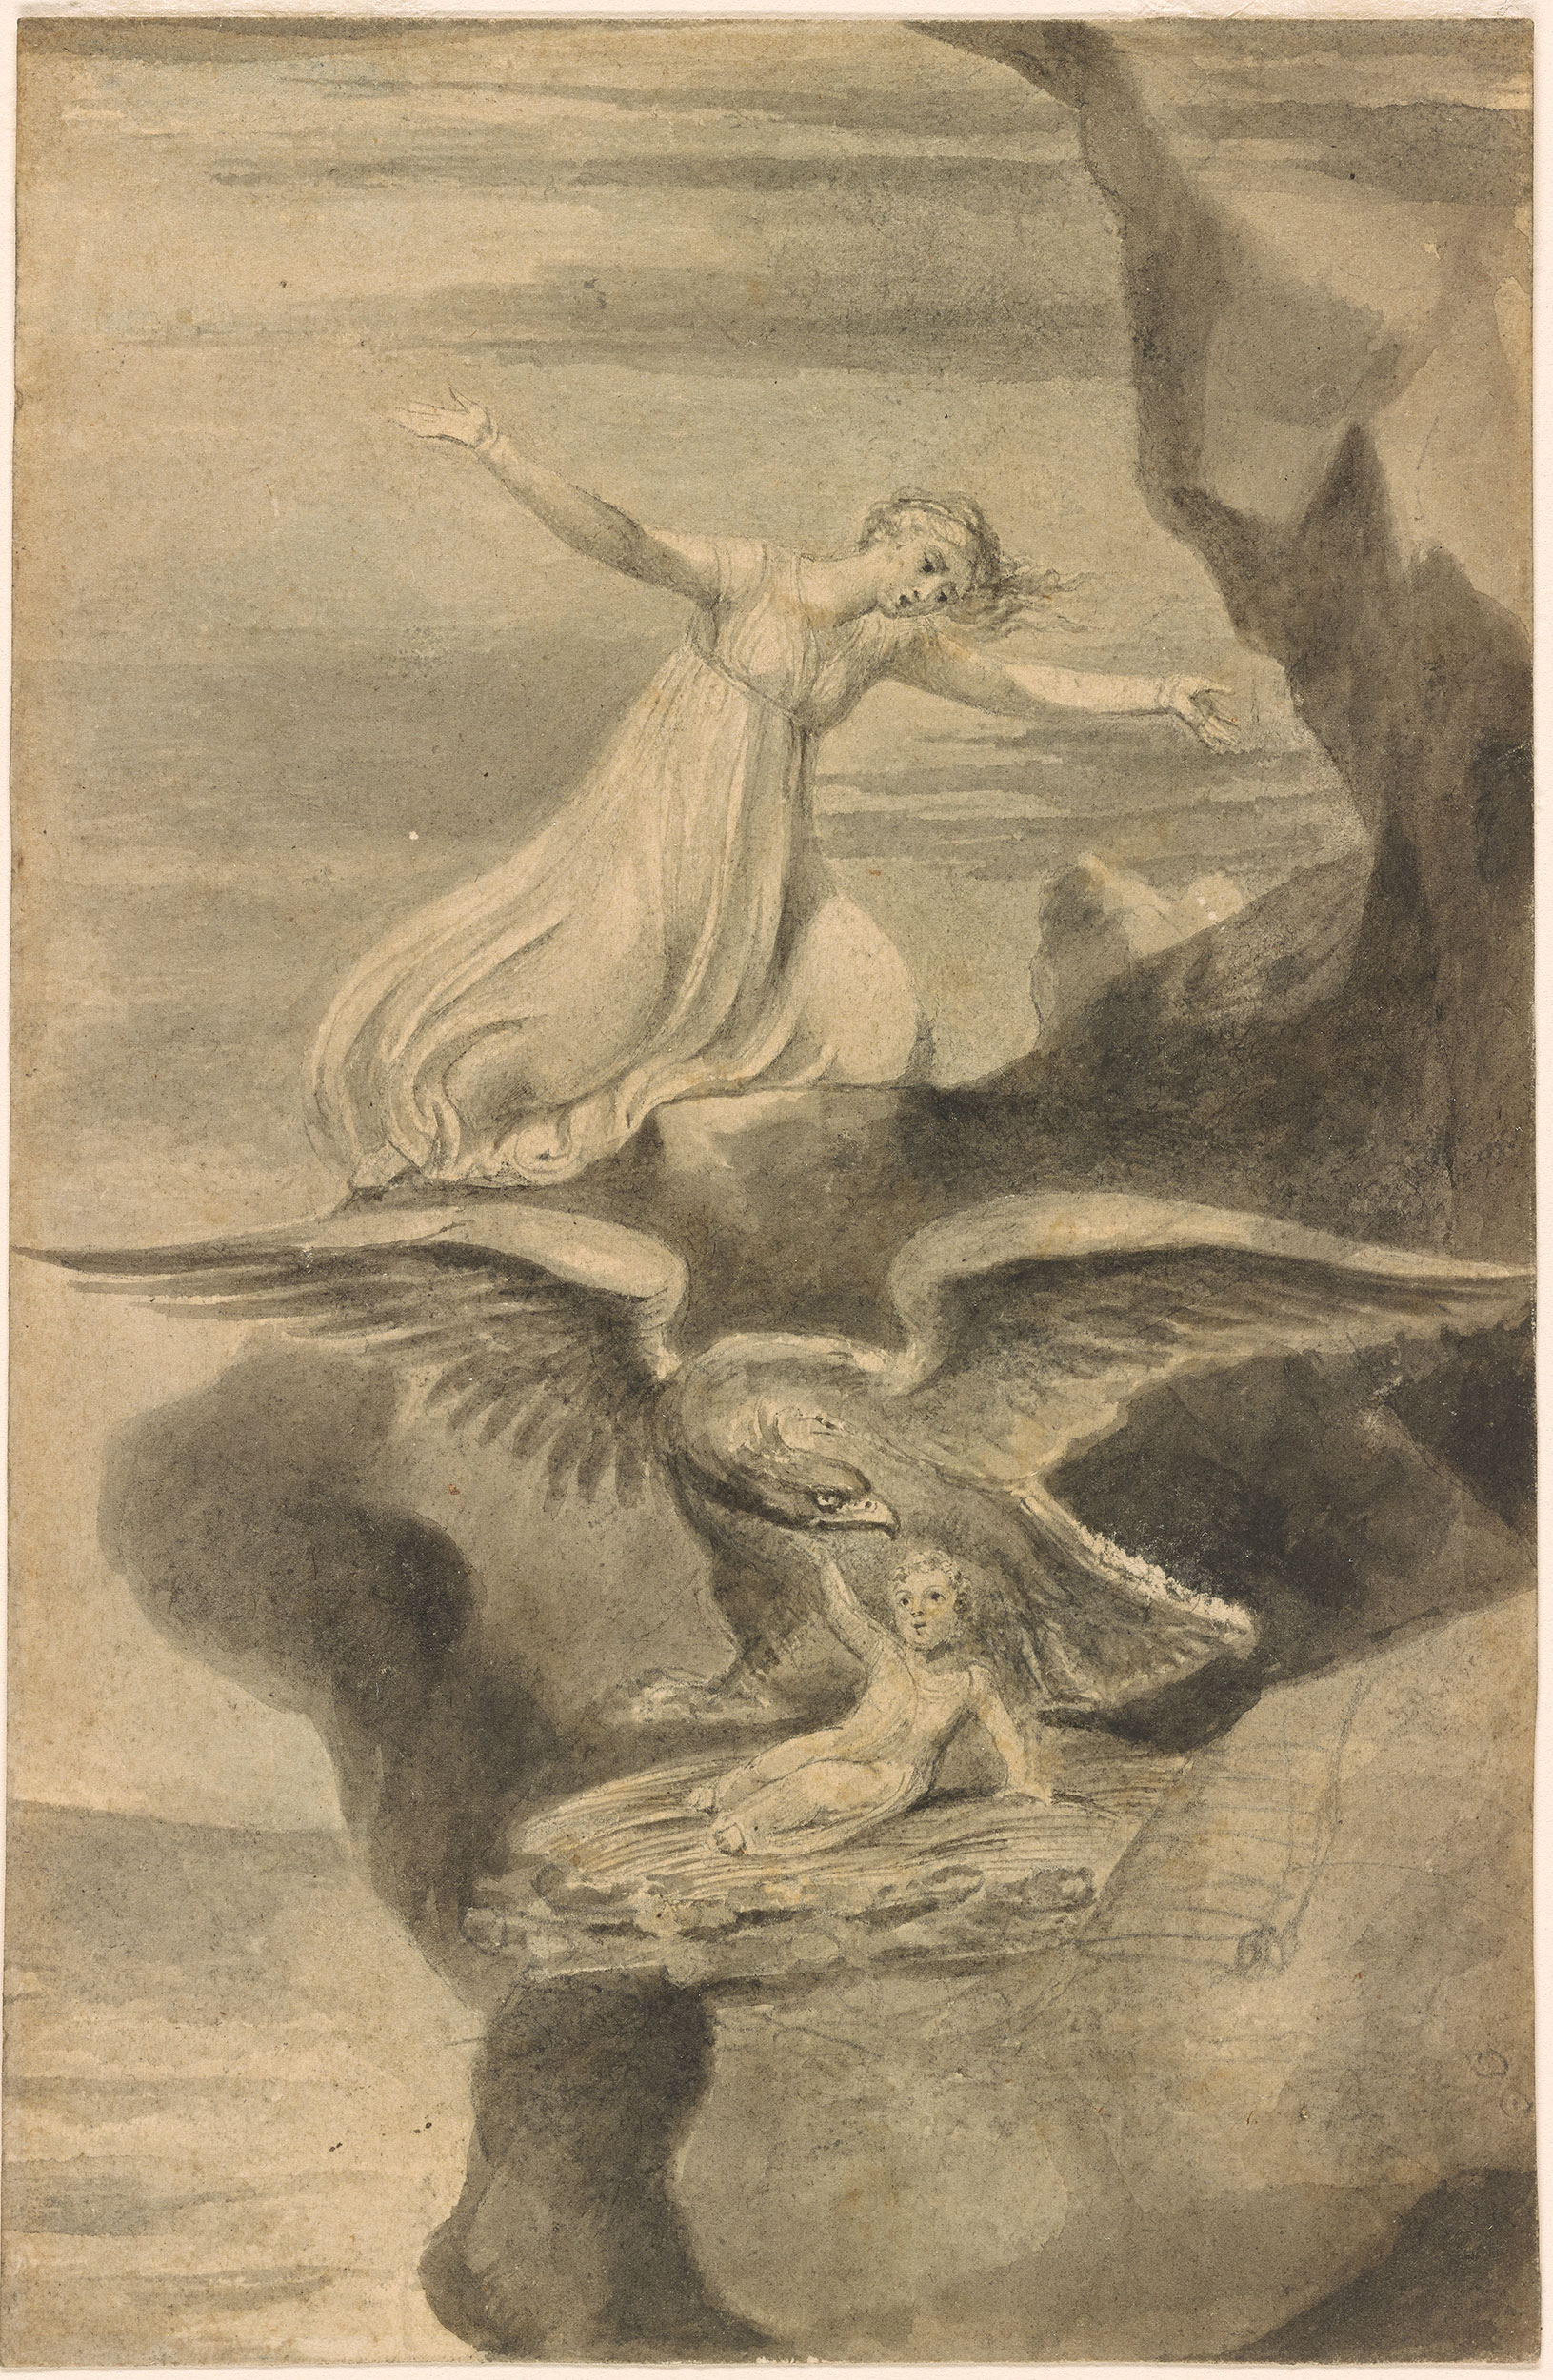 William Blake The Eagle Drawings Online The Morgan 